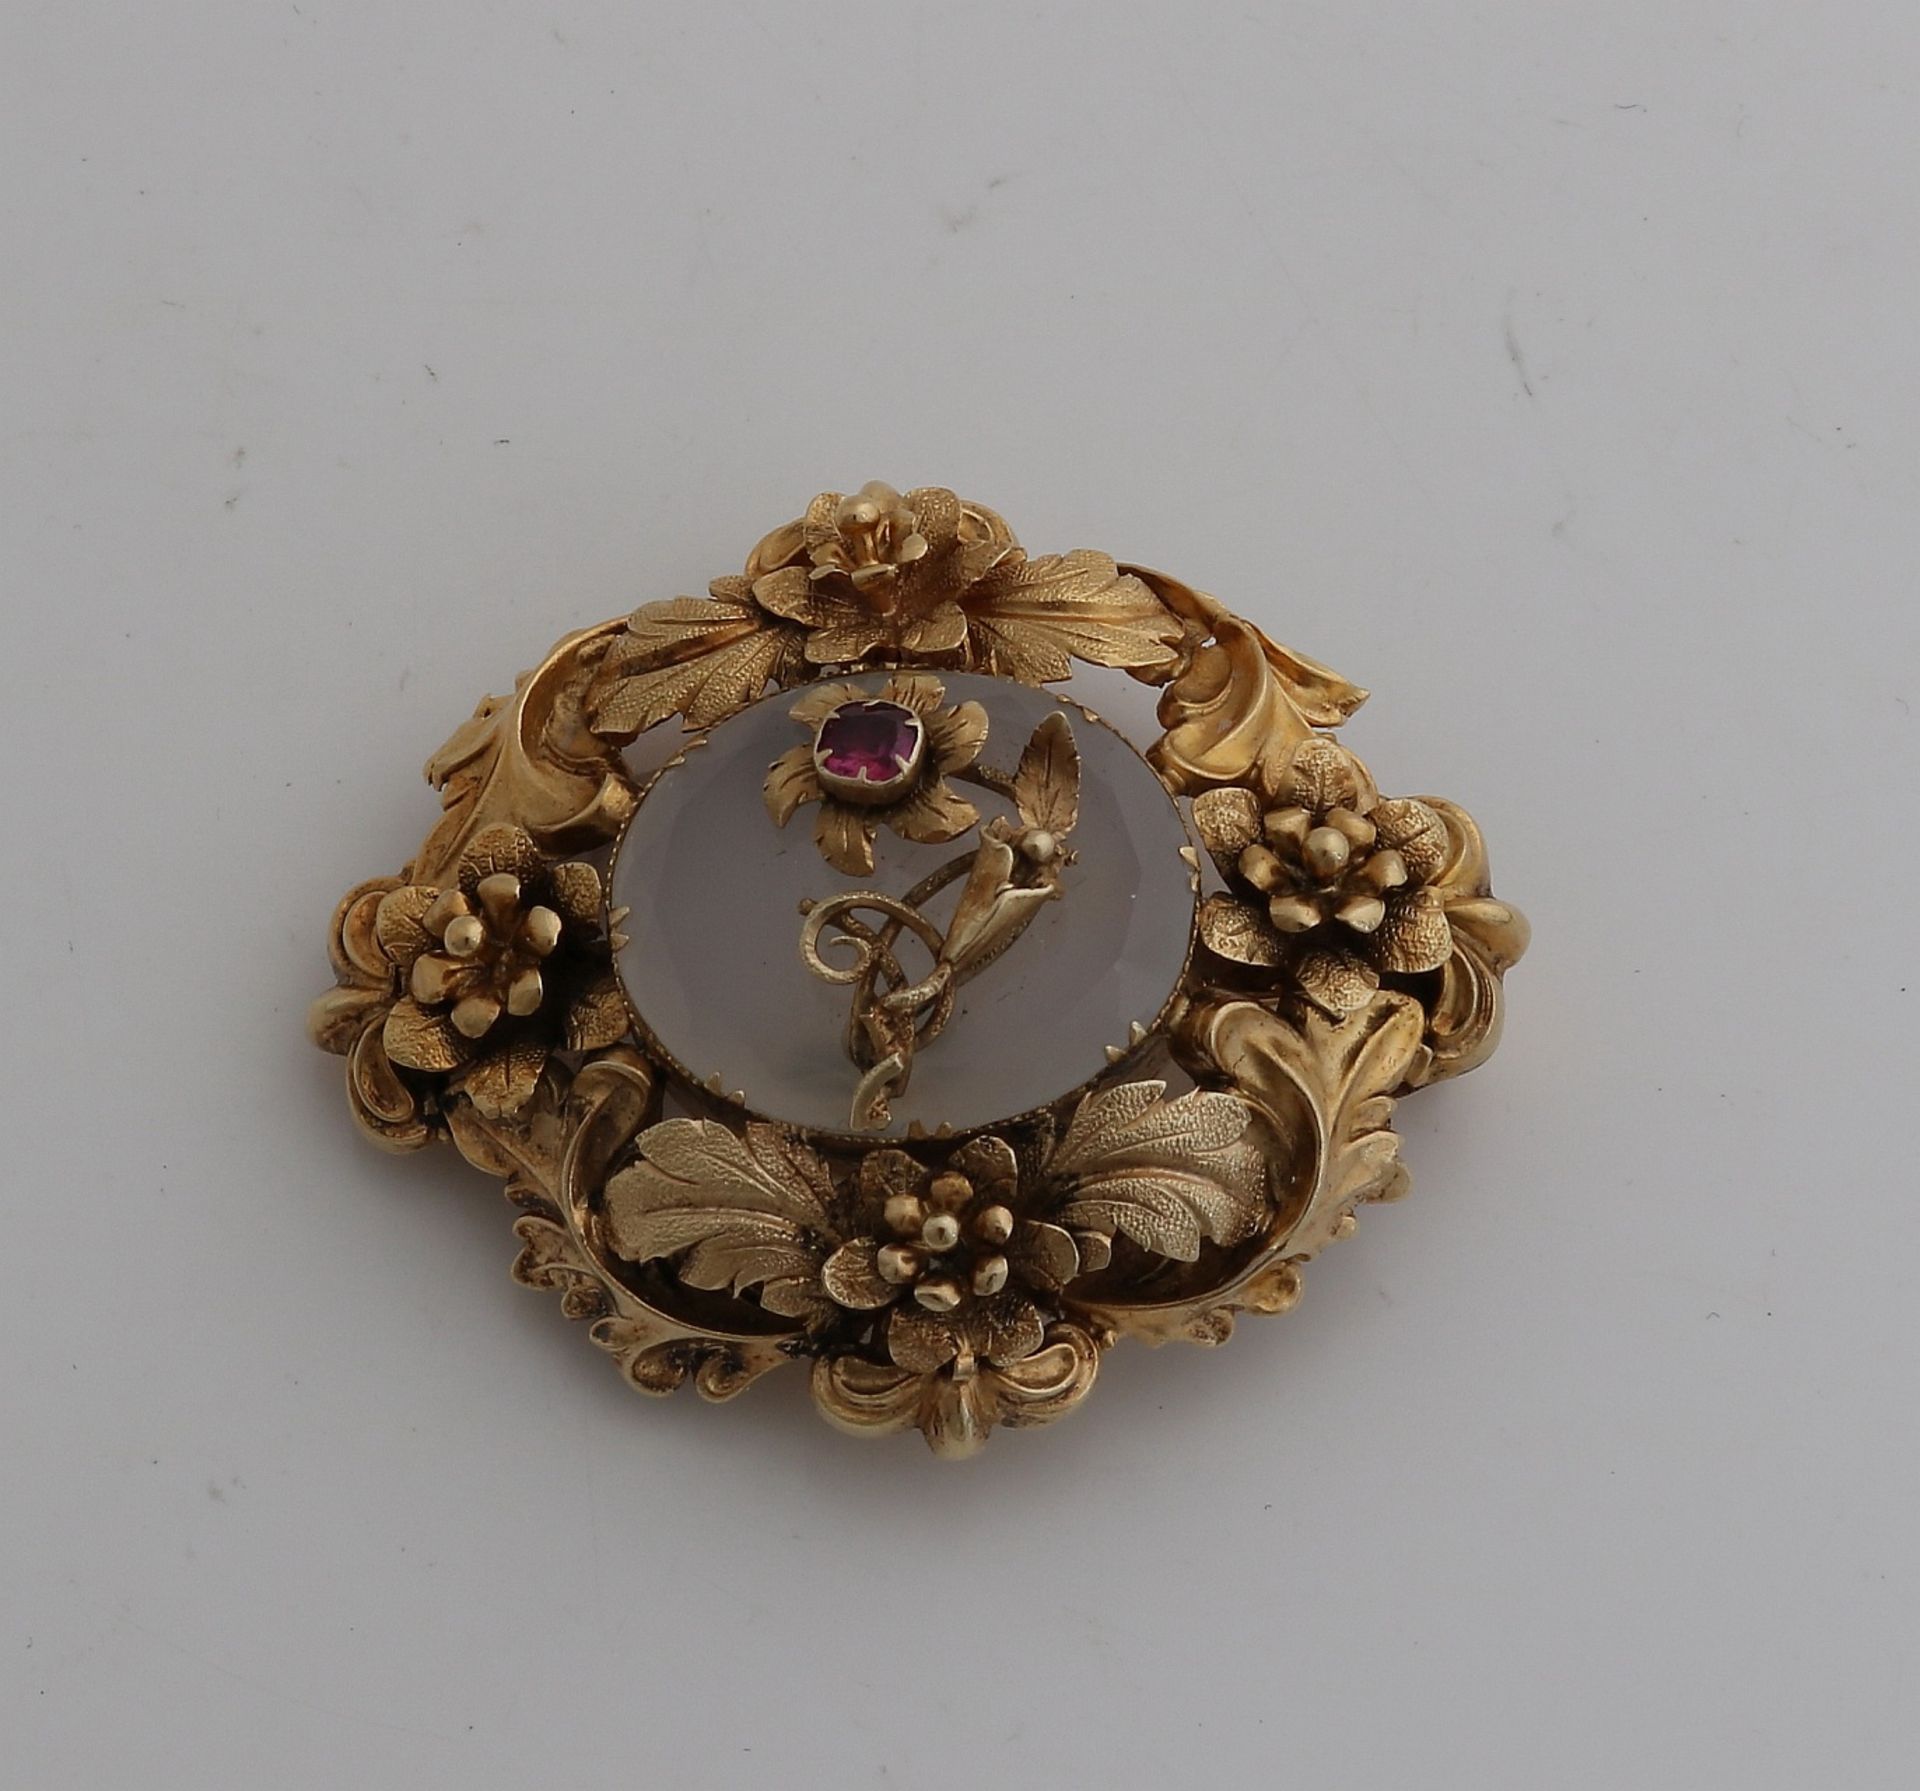 Gold pendant / brooch with red stone - Image 2 of 2